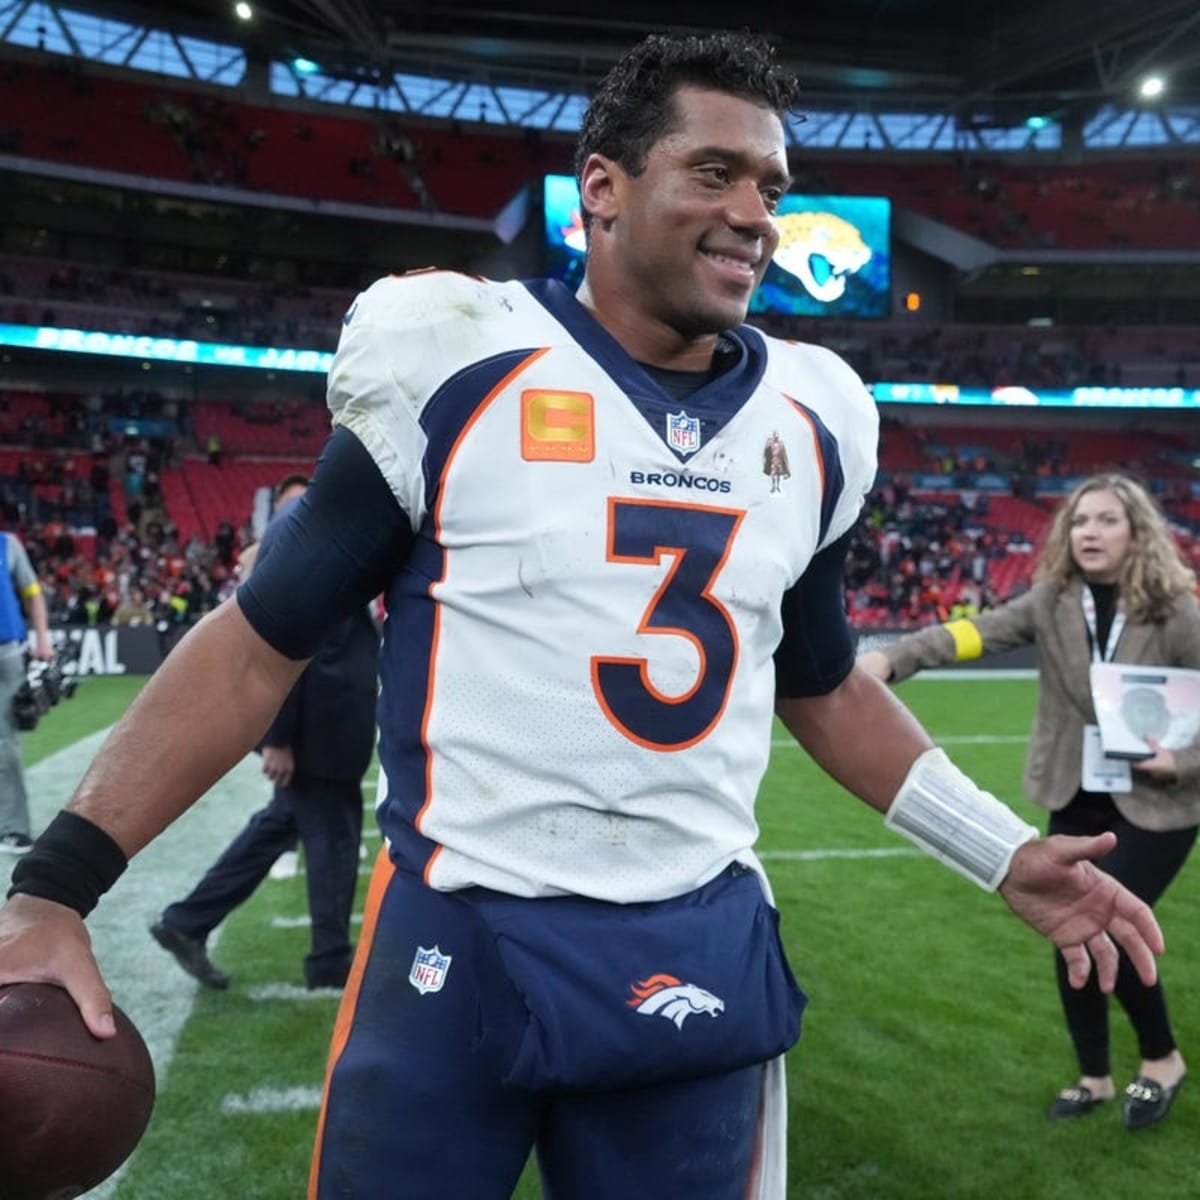 Broncos at Bears Free Live Stream NFL Online, Channel, Time - How to Watch and Stream Major League and College Sports